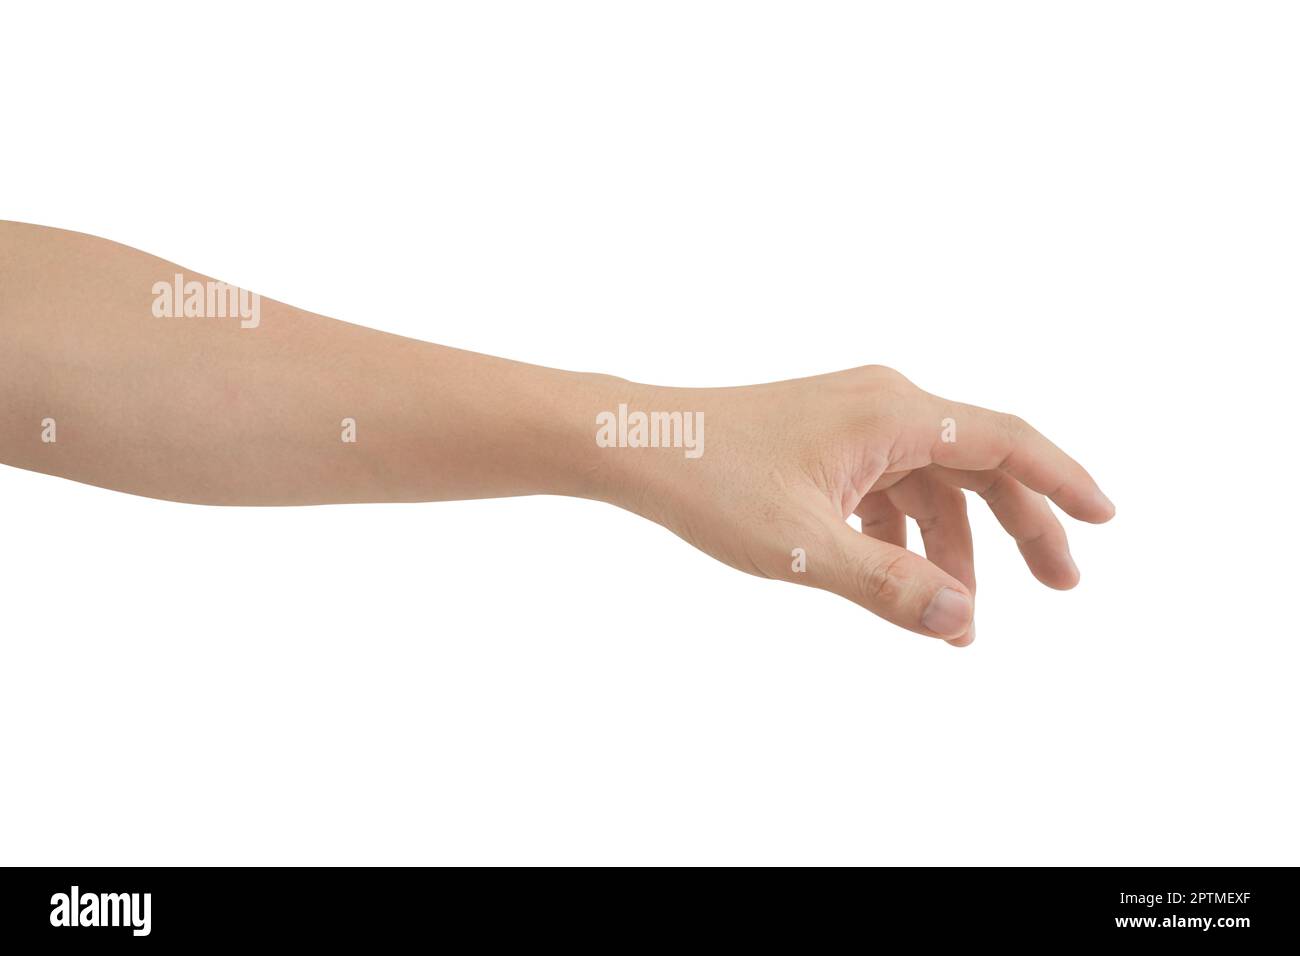 Hand gesture isolated on white background include clipping path. Stock Photo